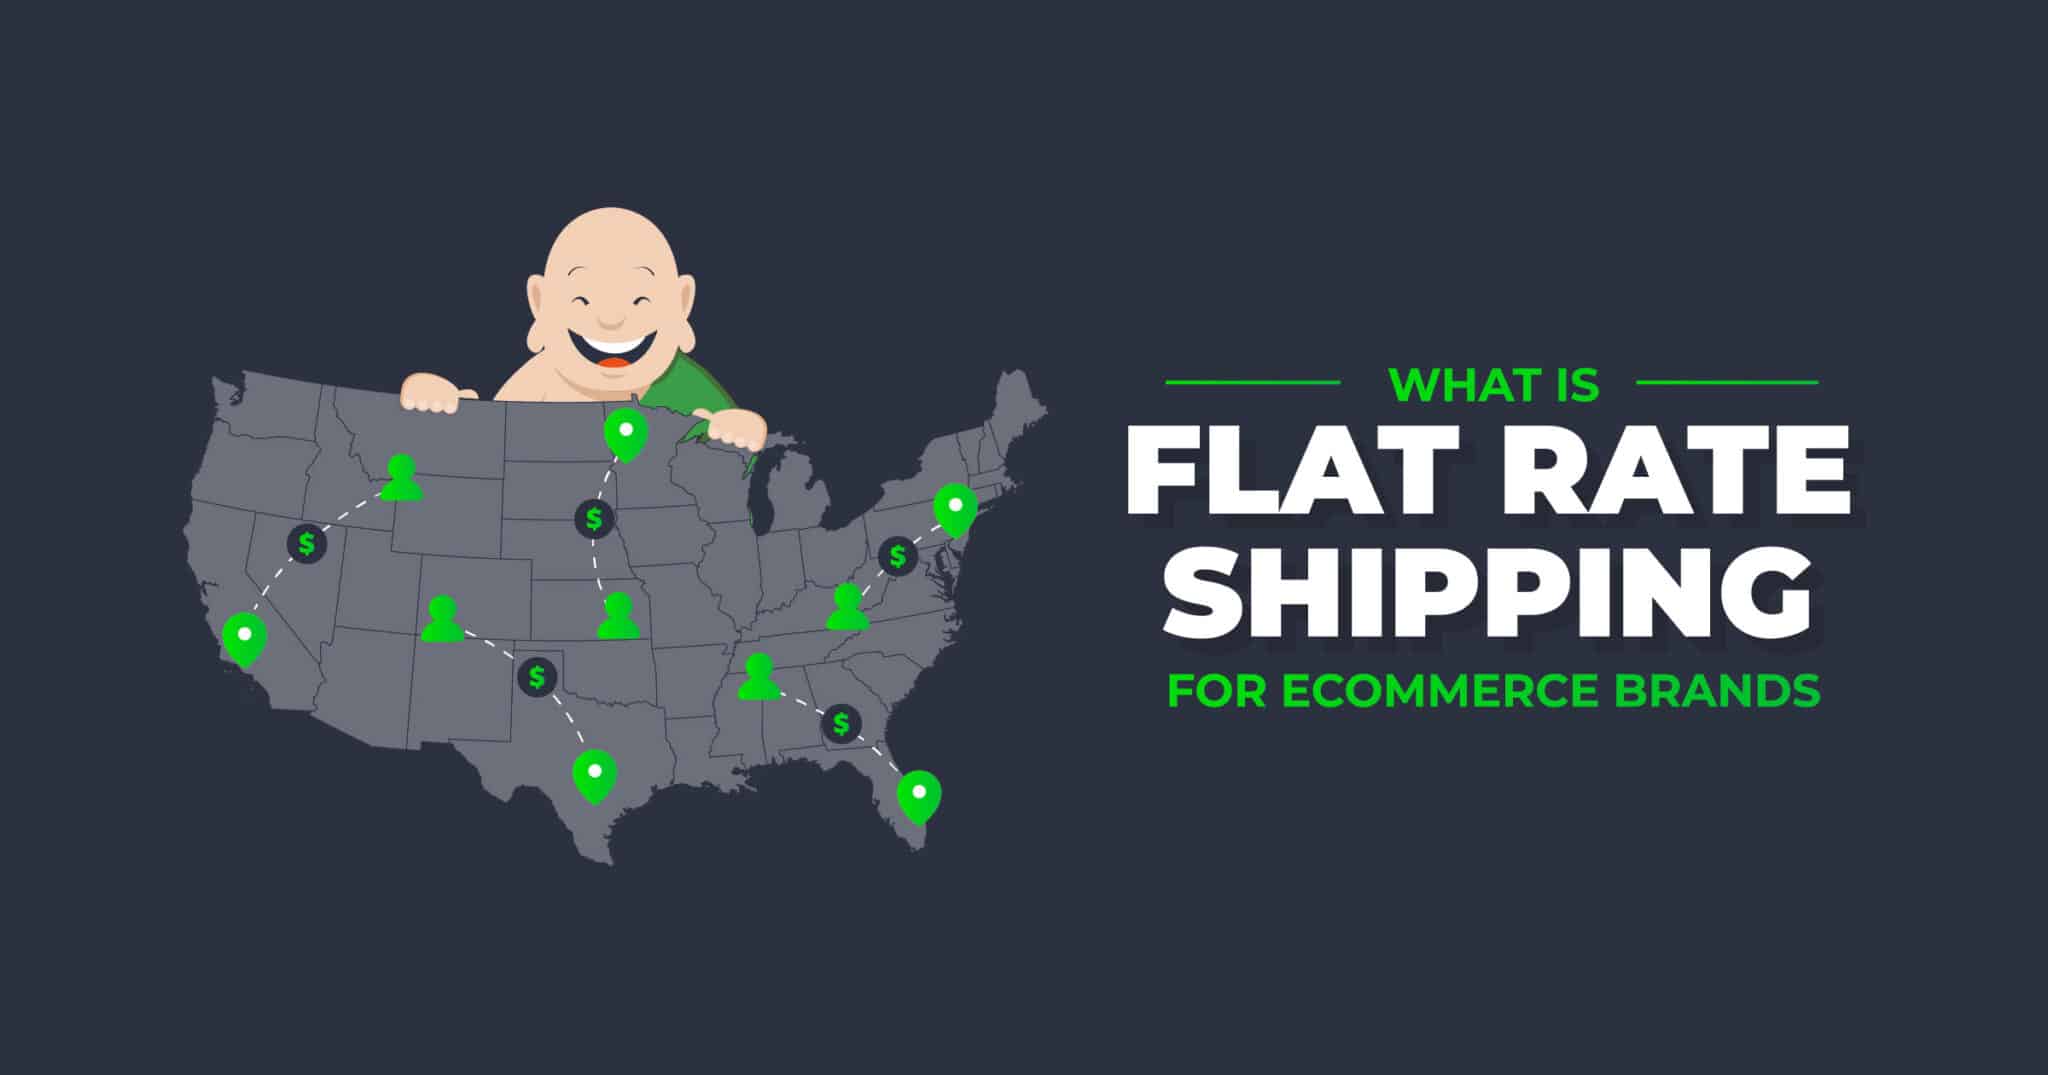 What is Flat Rate Shipping for eCommerce Brands?